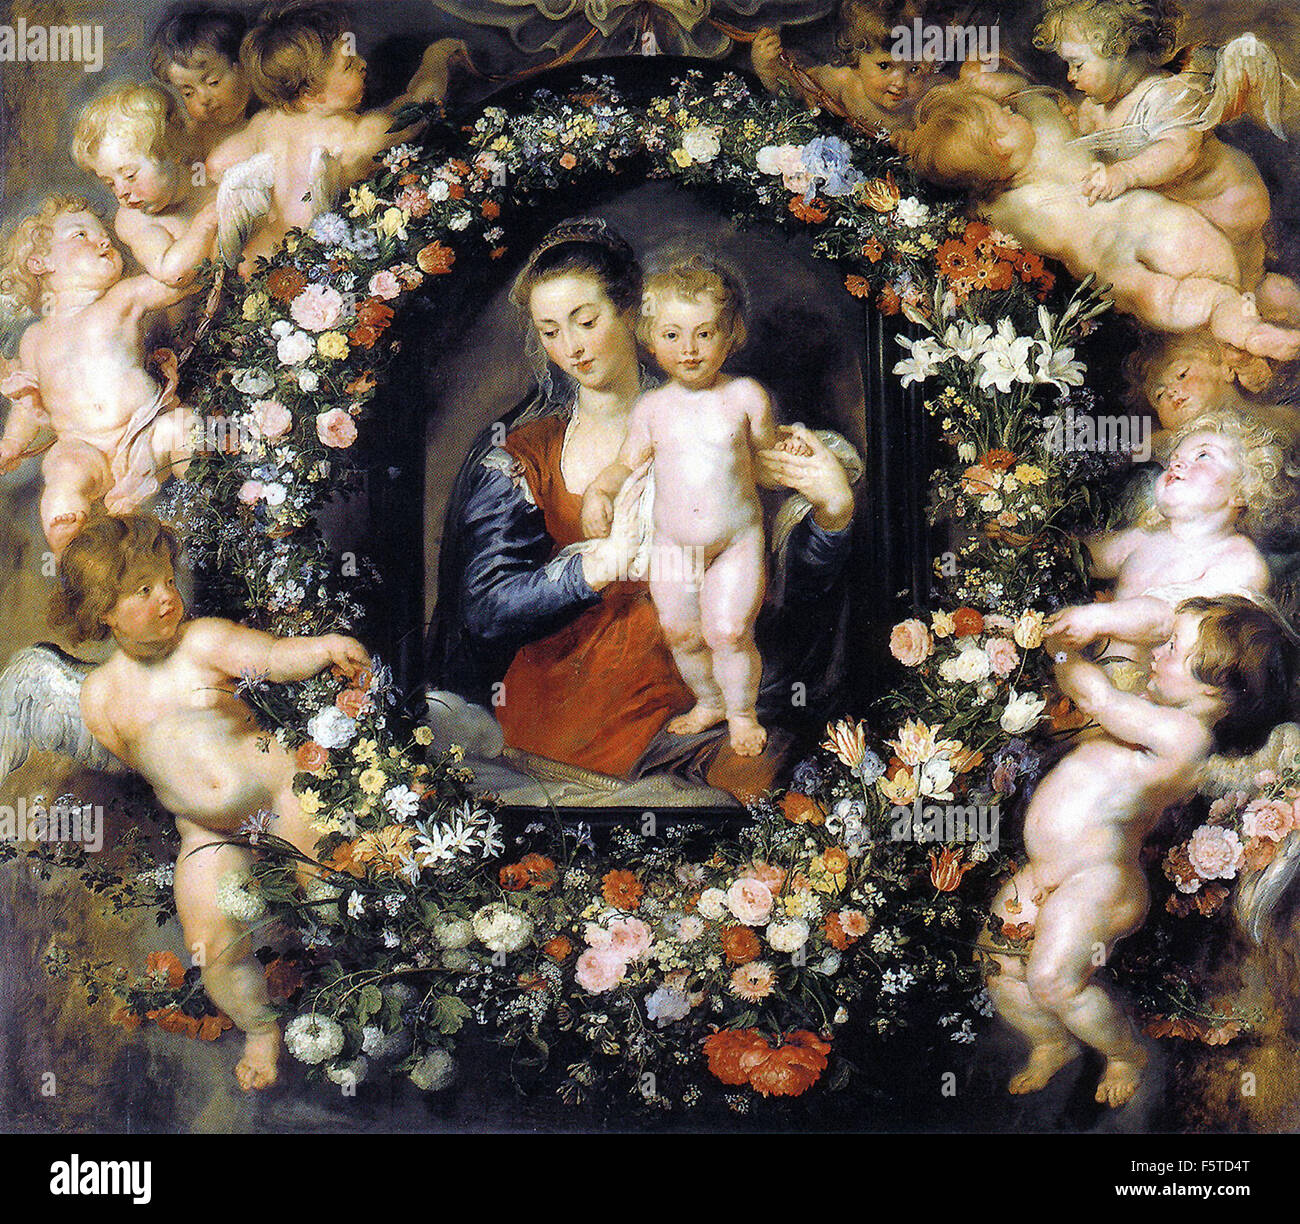 Peter Paul Rubens - Madonna in a Garland of Flowers Stock Photo